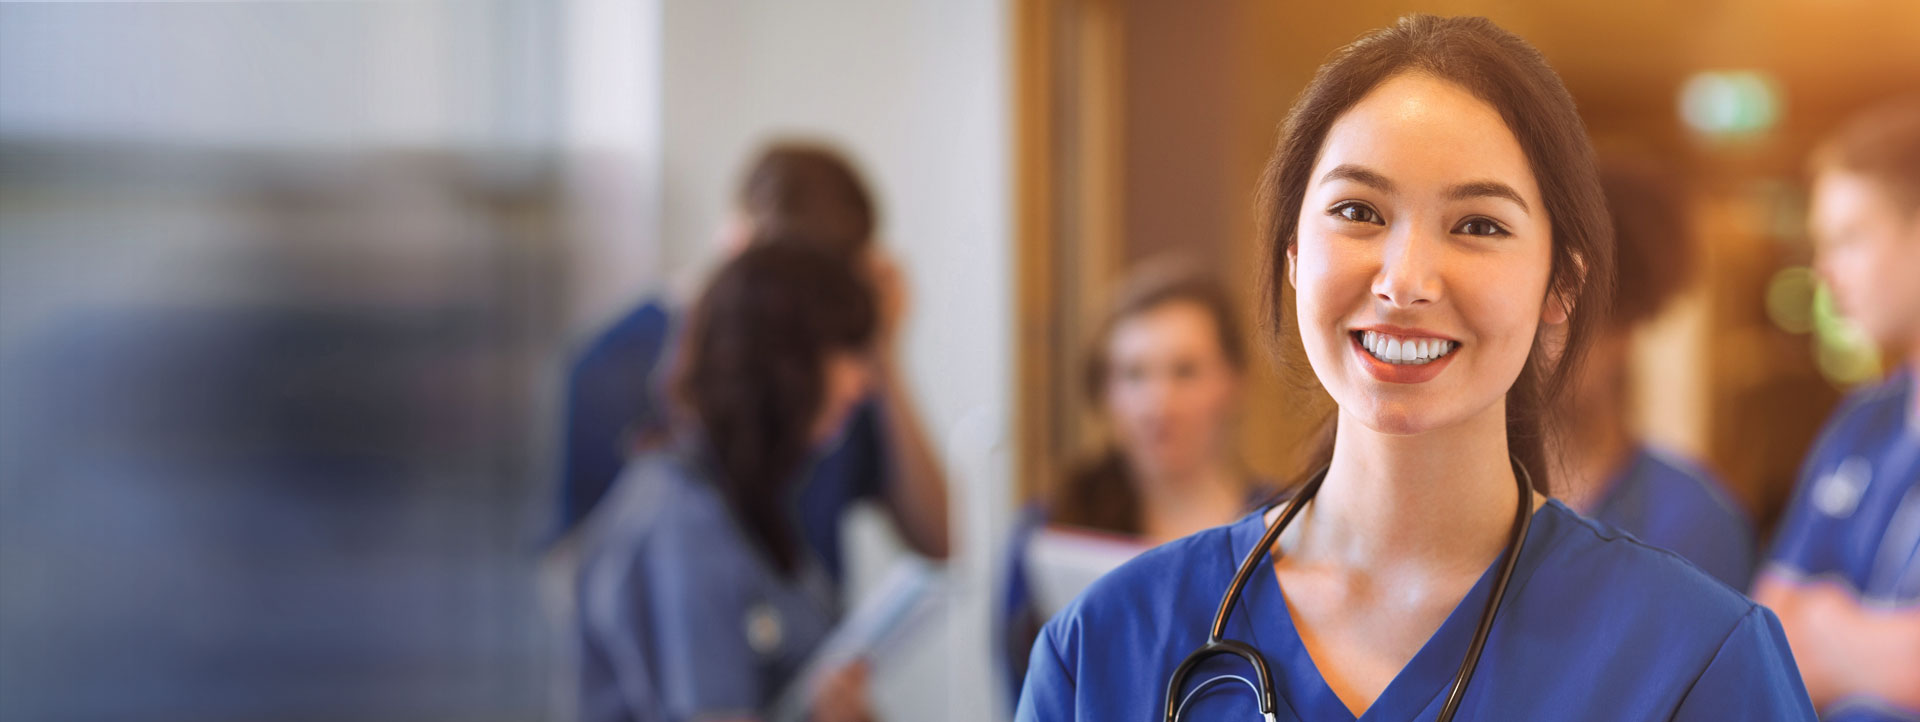 Woman in scrubs smiling at camera with group of medical professionals talking in the background